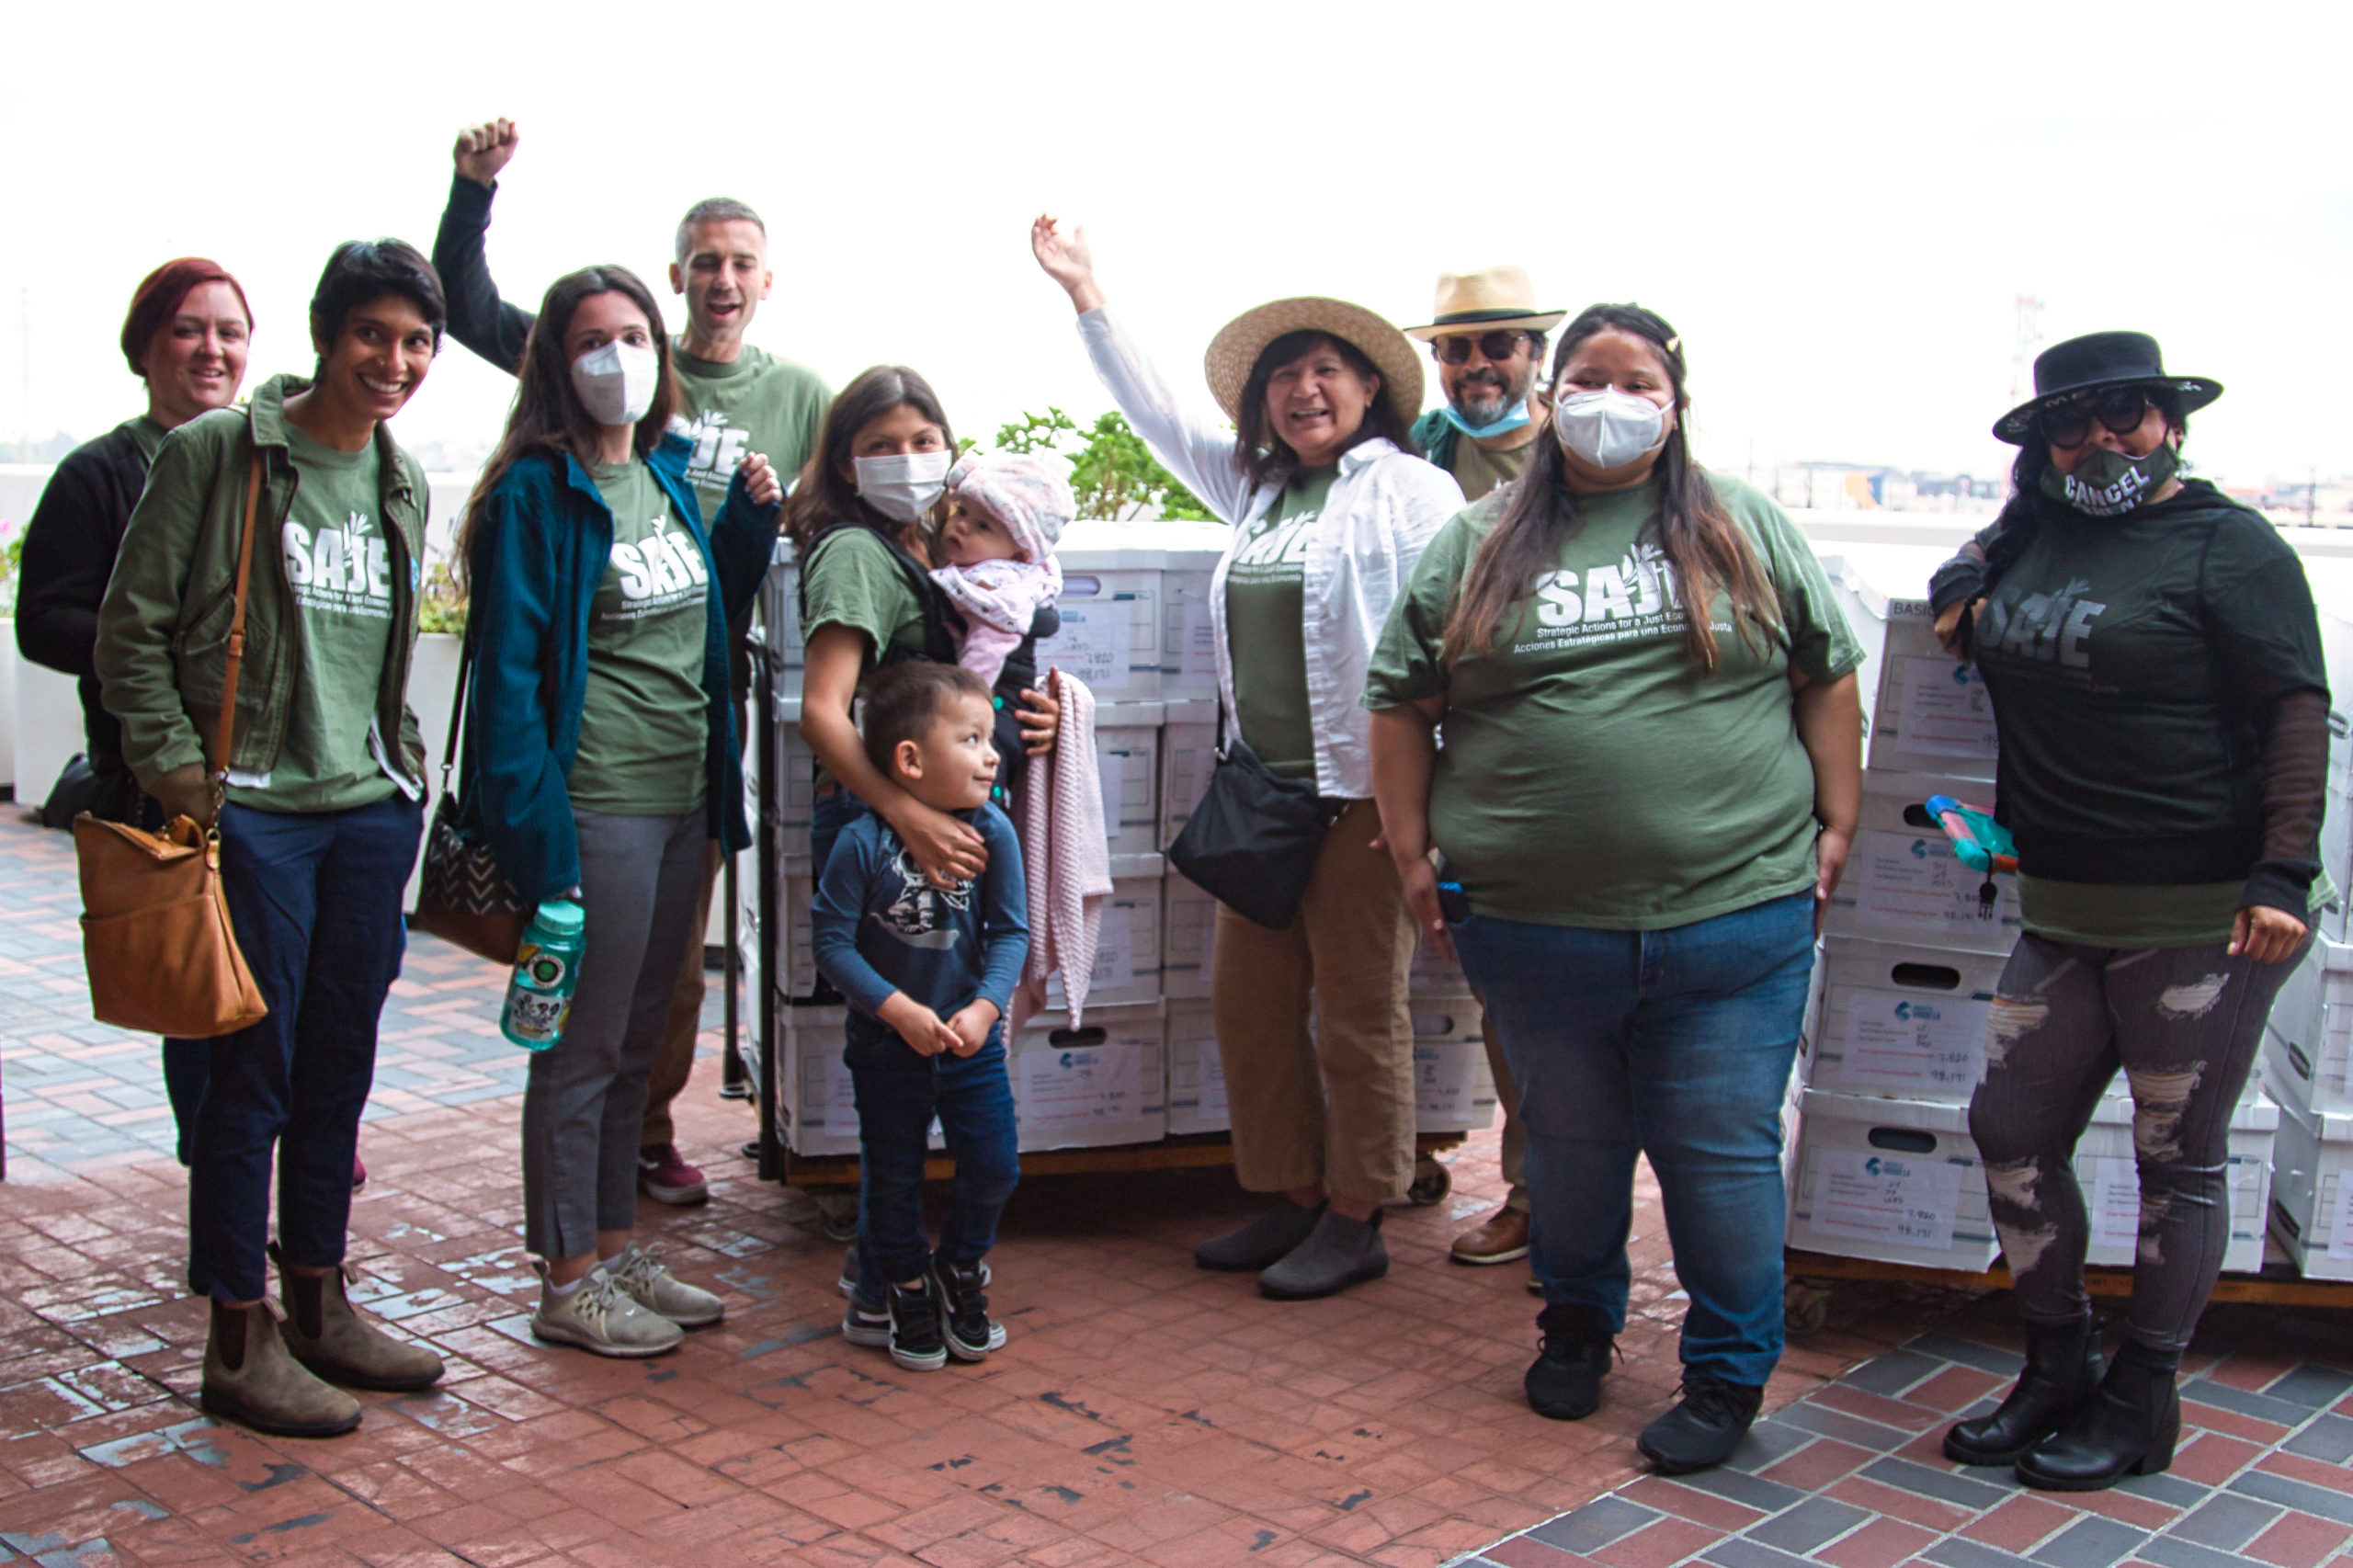 UNITED TO HOUSE LA DELIVERS 98,171 SIGNATURES TO FUND AFFORDABLE HOUSING!